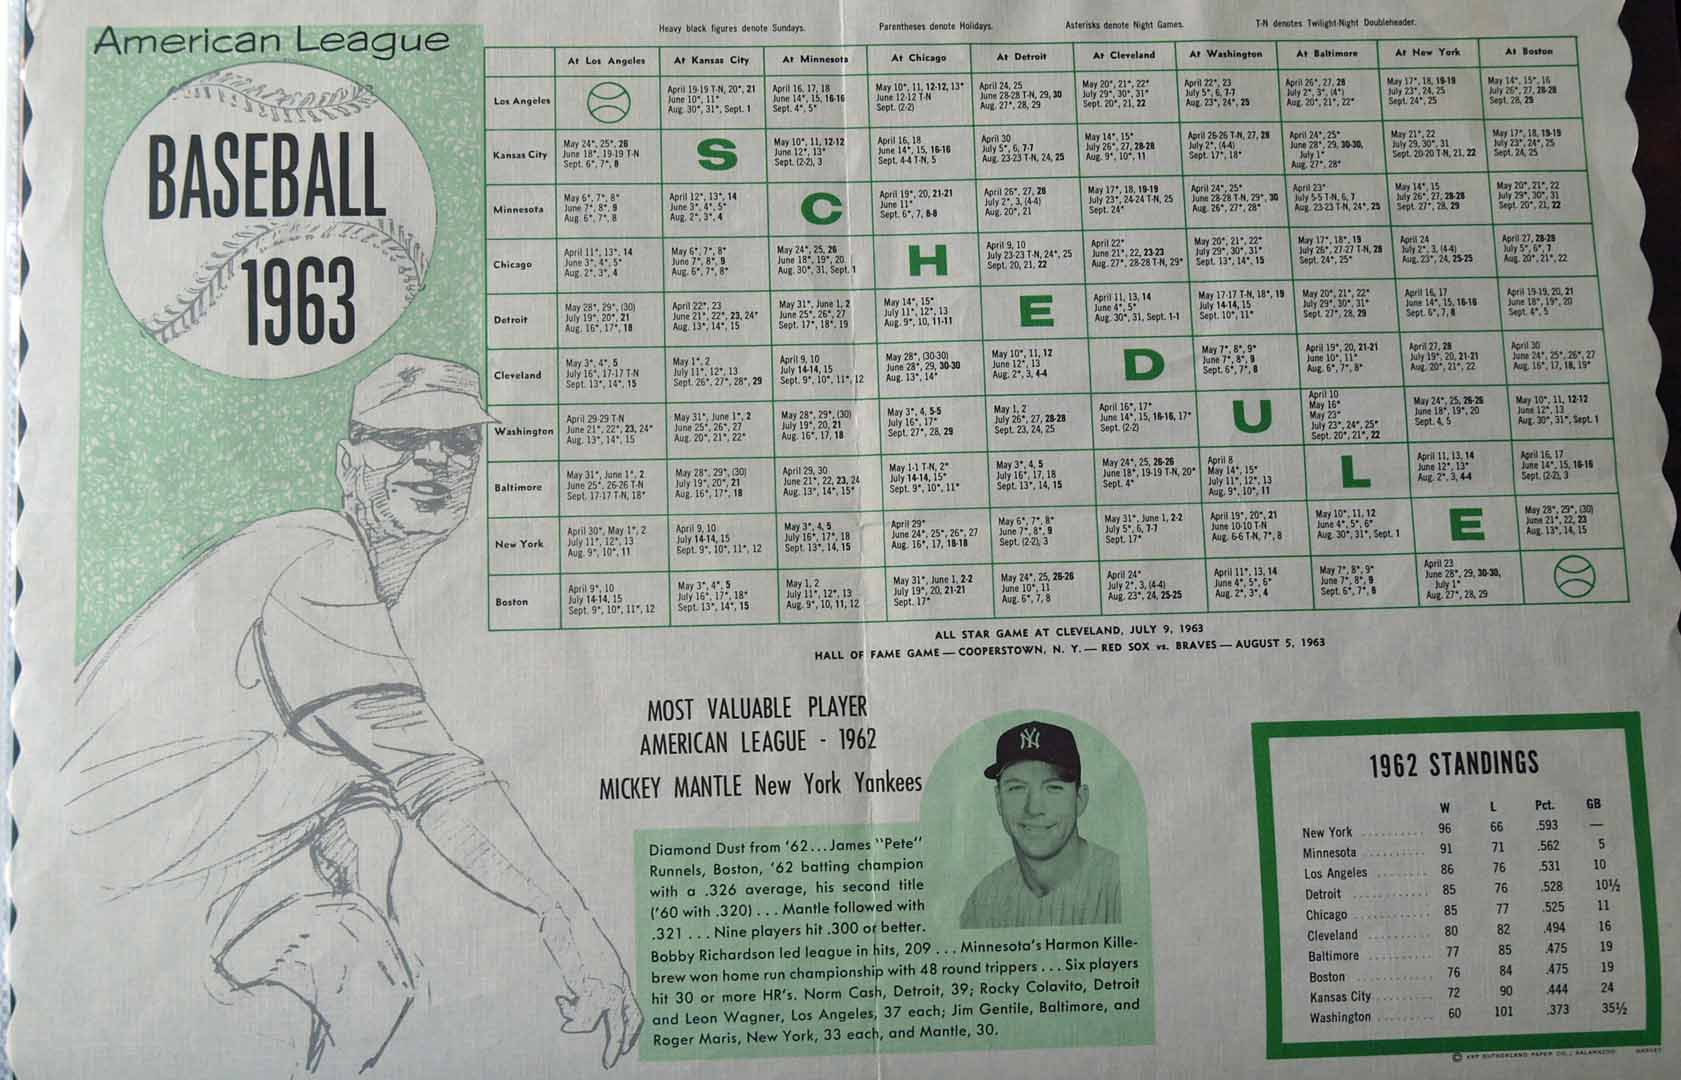 1963 place mat sutherland paper